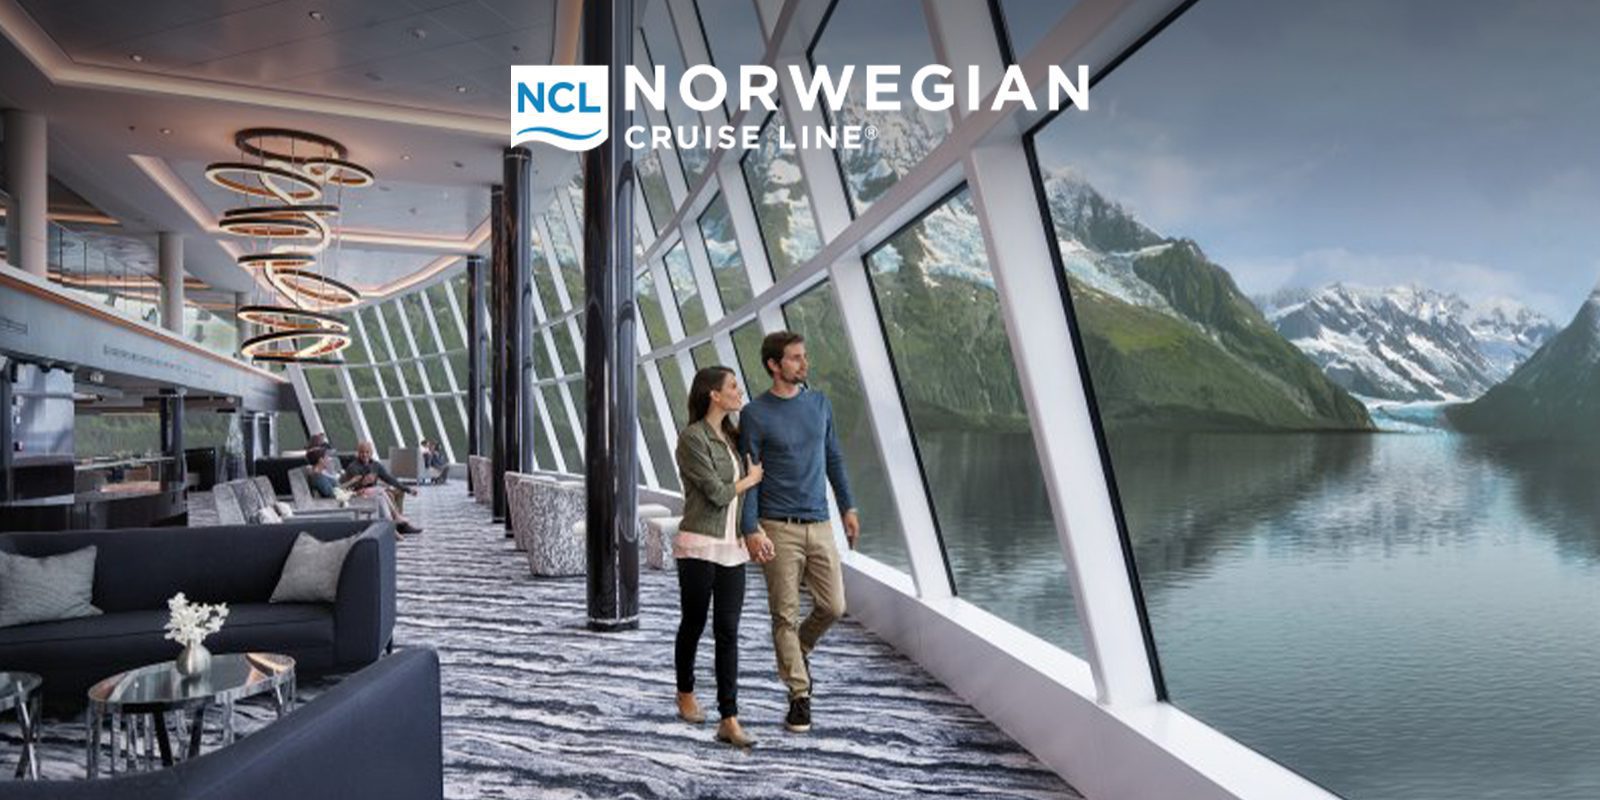 Passengers enjoying the serene views from the Observation Lounge aboard Norwegian Cruise Line in Alaska.